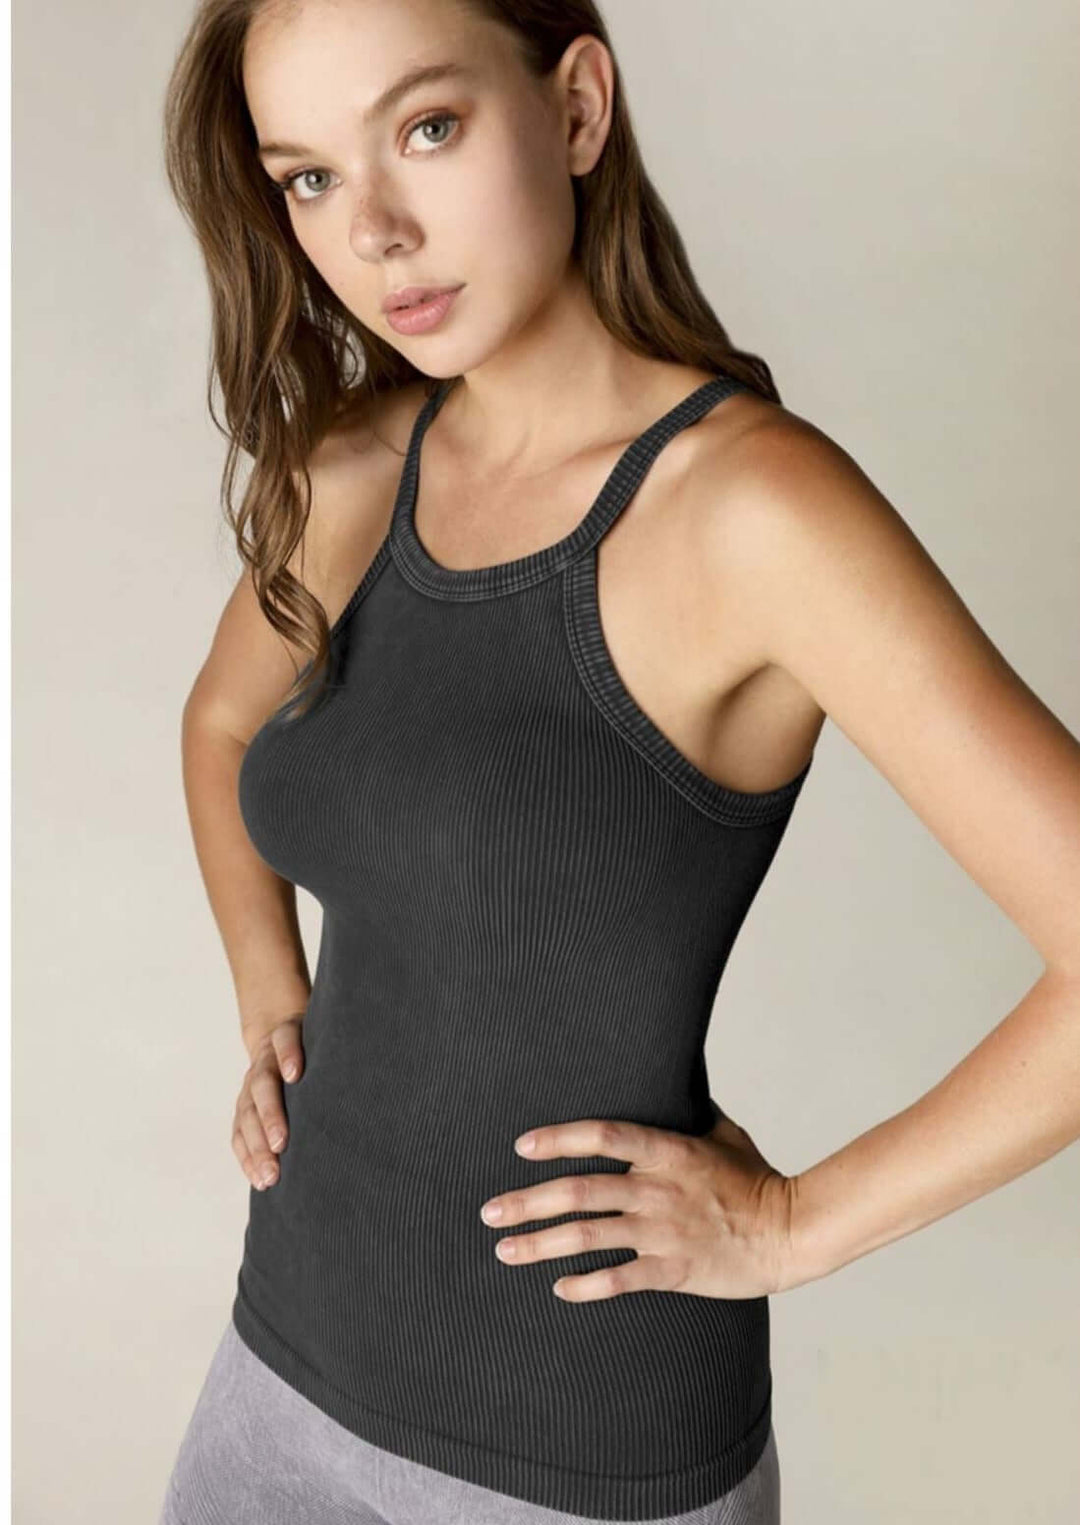 Niki Biki Ladies Fitted Vintage High Neck Ribbed Tank Style NS7799 in Vintage Black | Made in USA | Classy Cozy Cool Women's Made in America Boutique